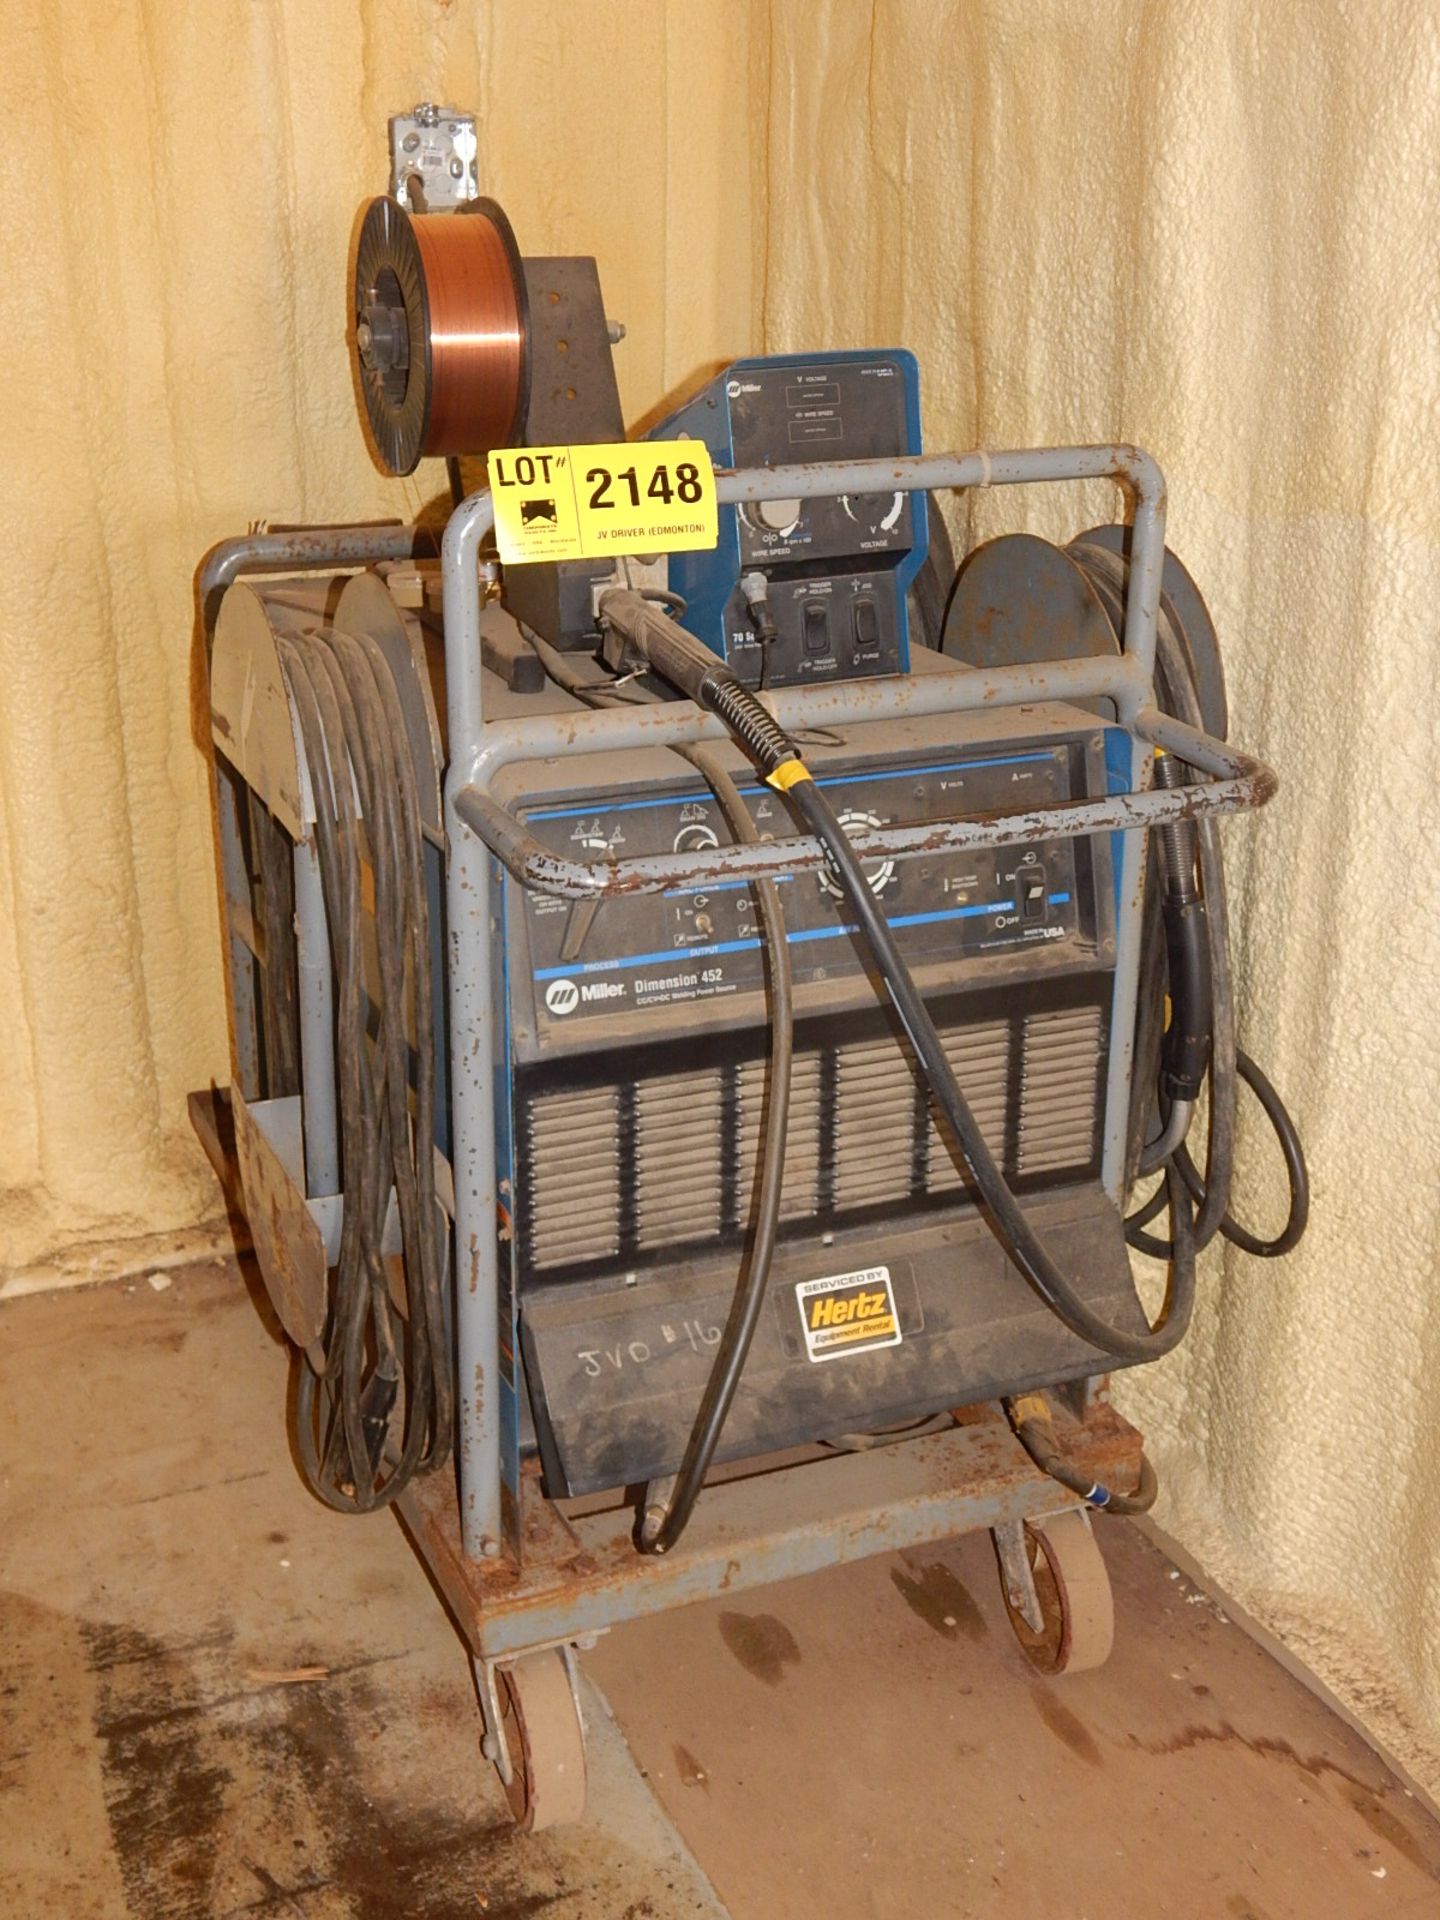 MILLER DIMENSION 452 WELDING POWER SOURCE WITH WIRE FEED, S/N: N/A (SC 445)